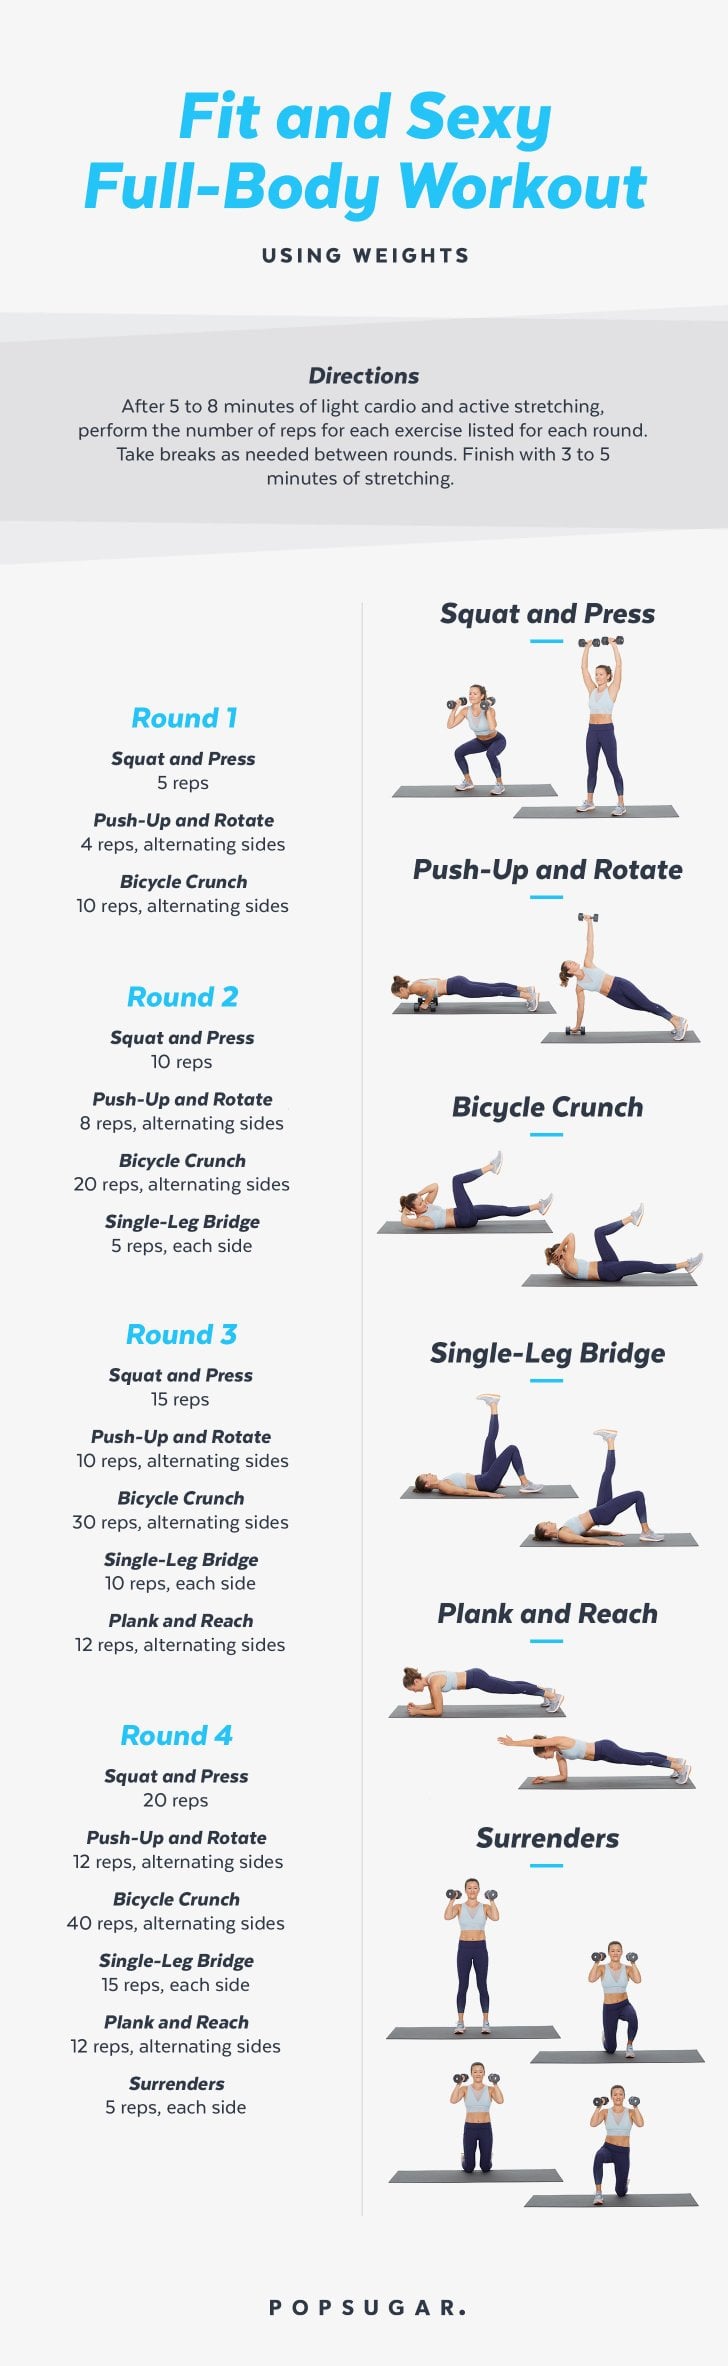 full-body-workout-with-weights-weekly-workout-schedule-with